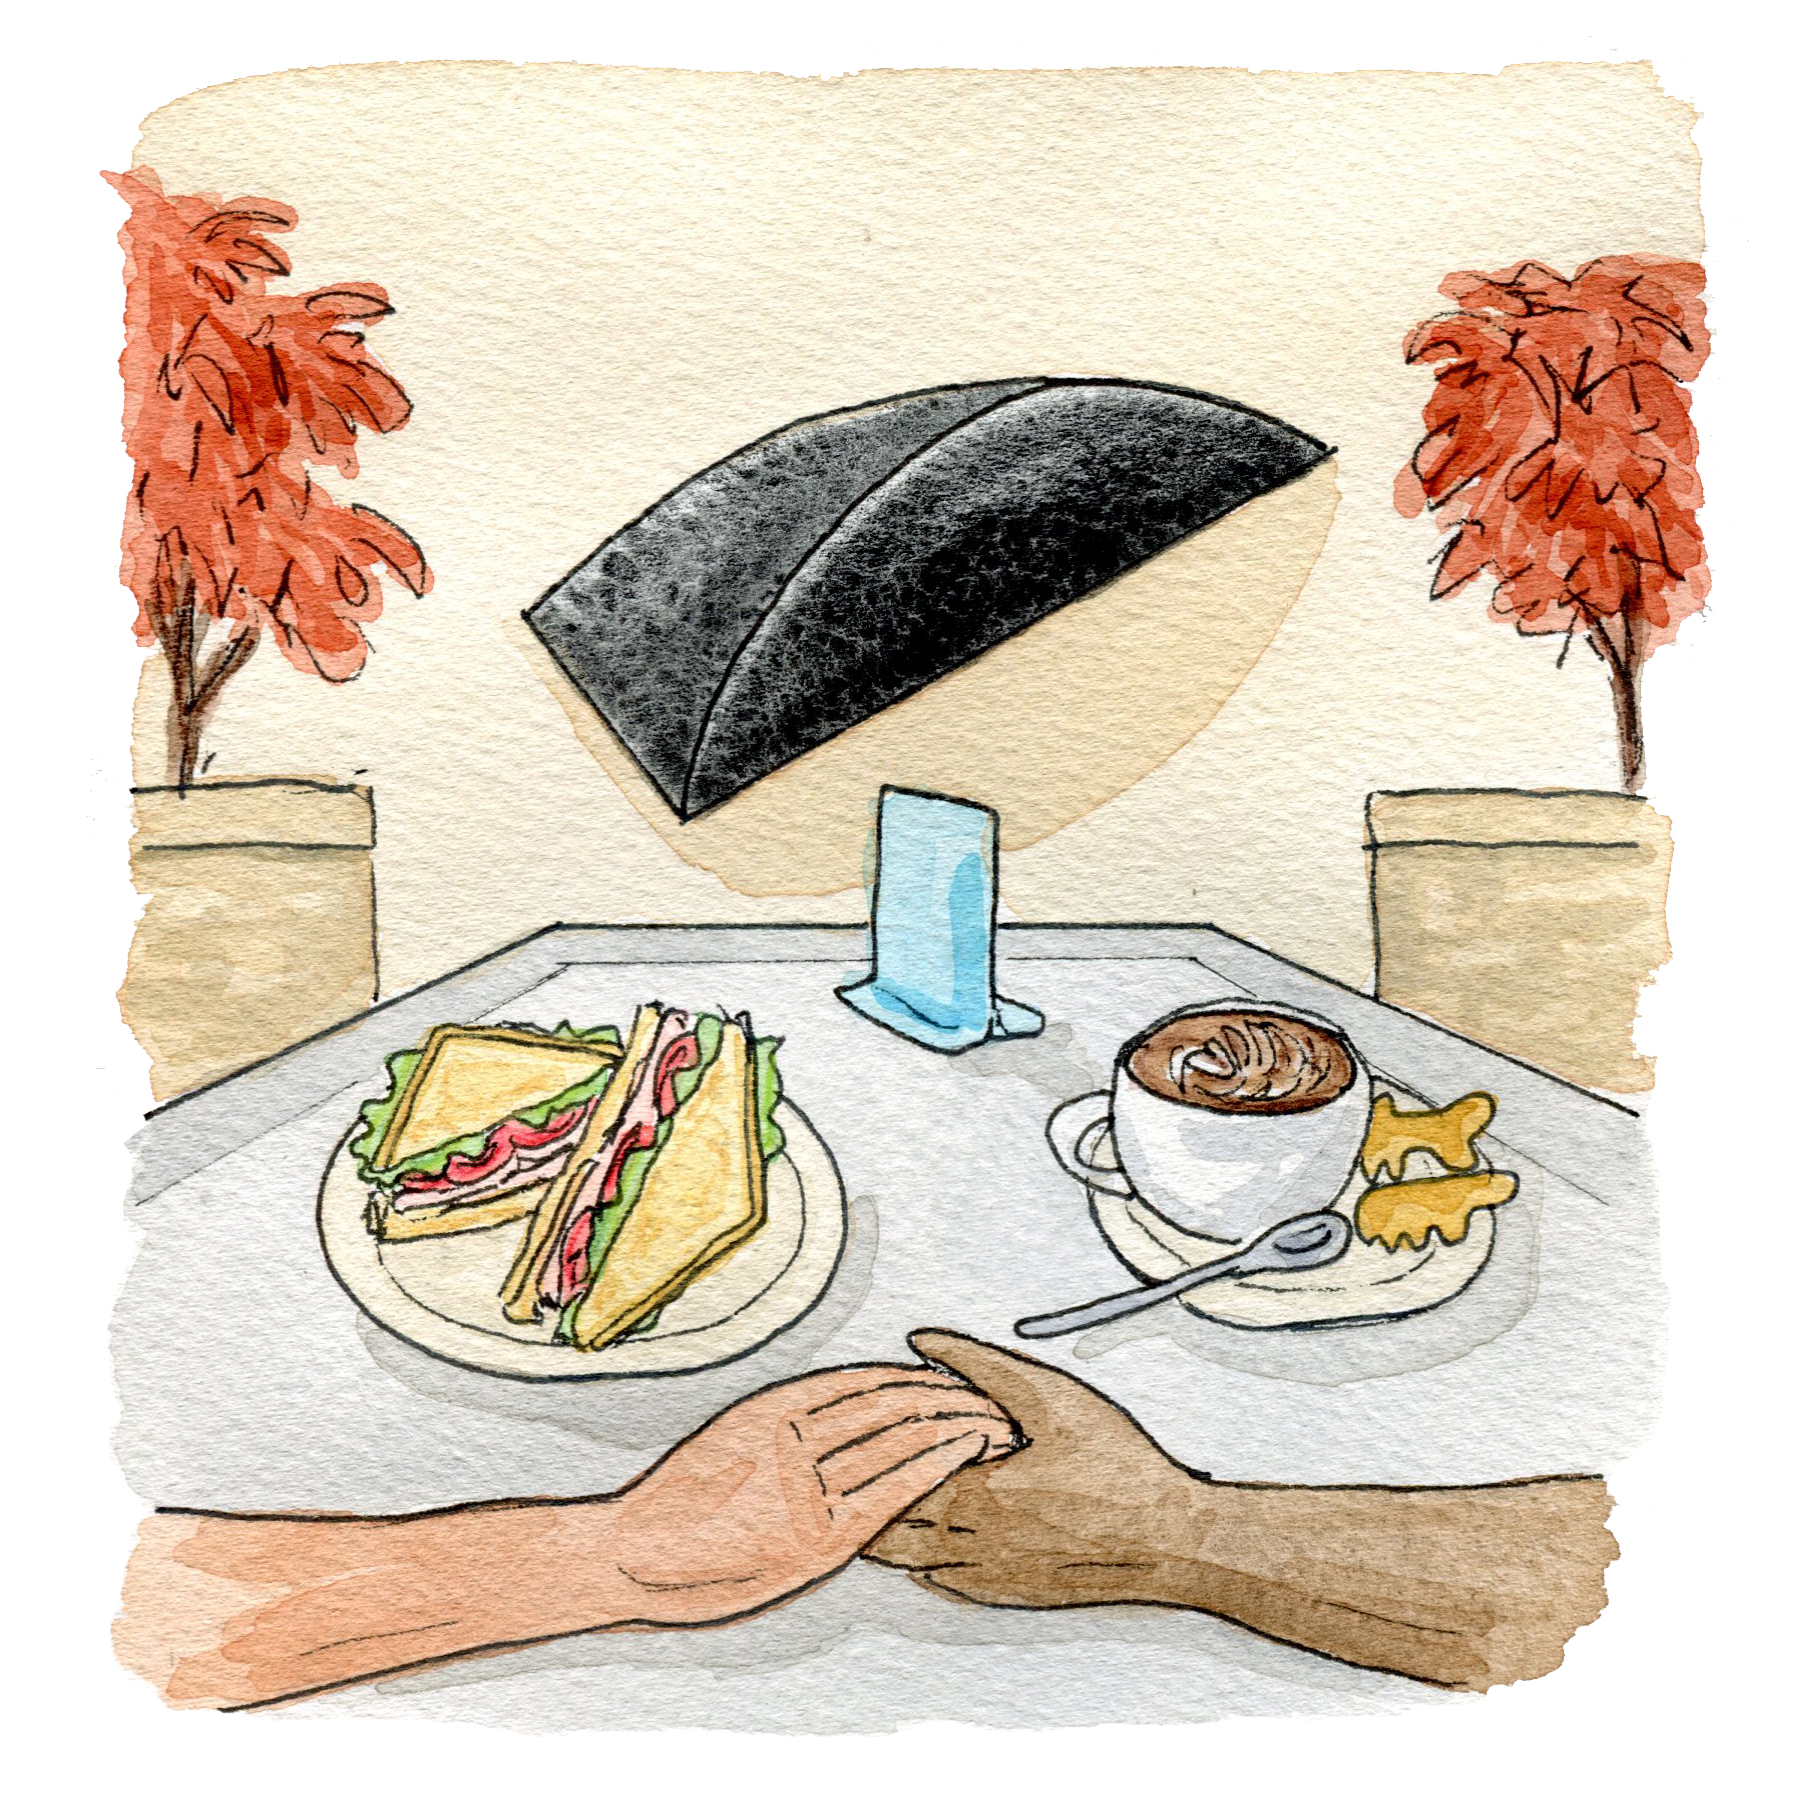 Illustration of two people holding hands and having lunch in the Phillips courtyard